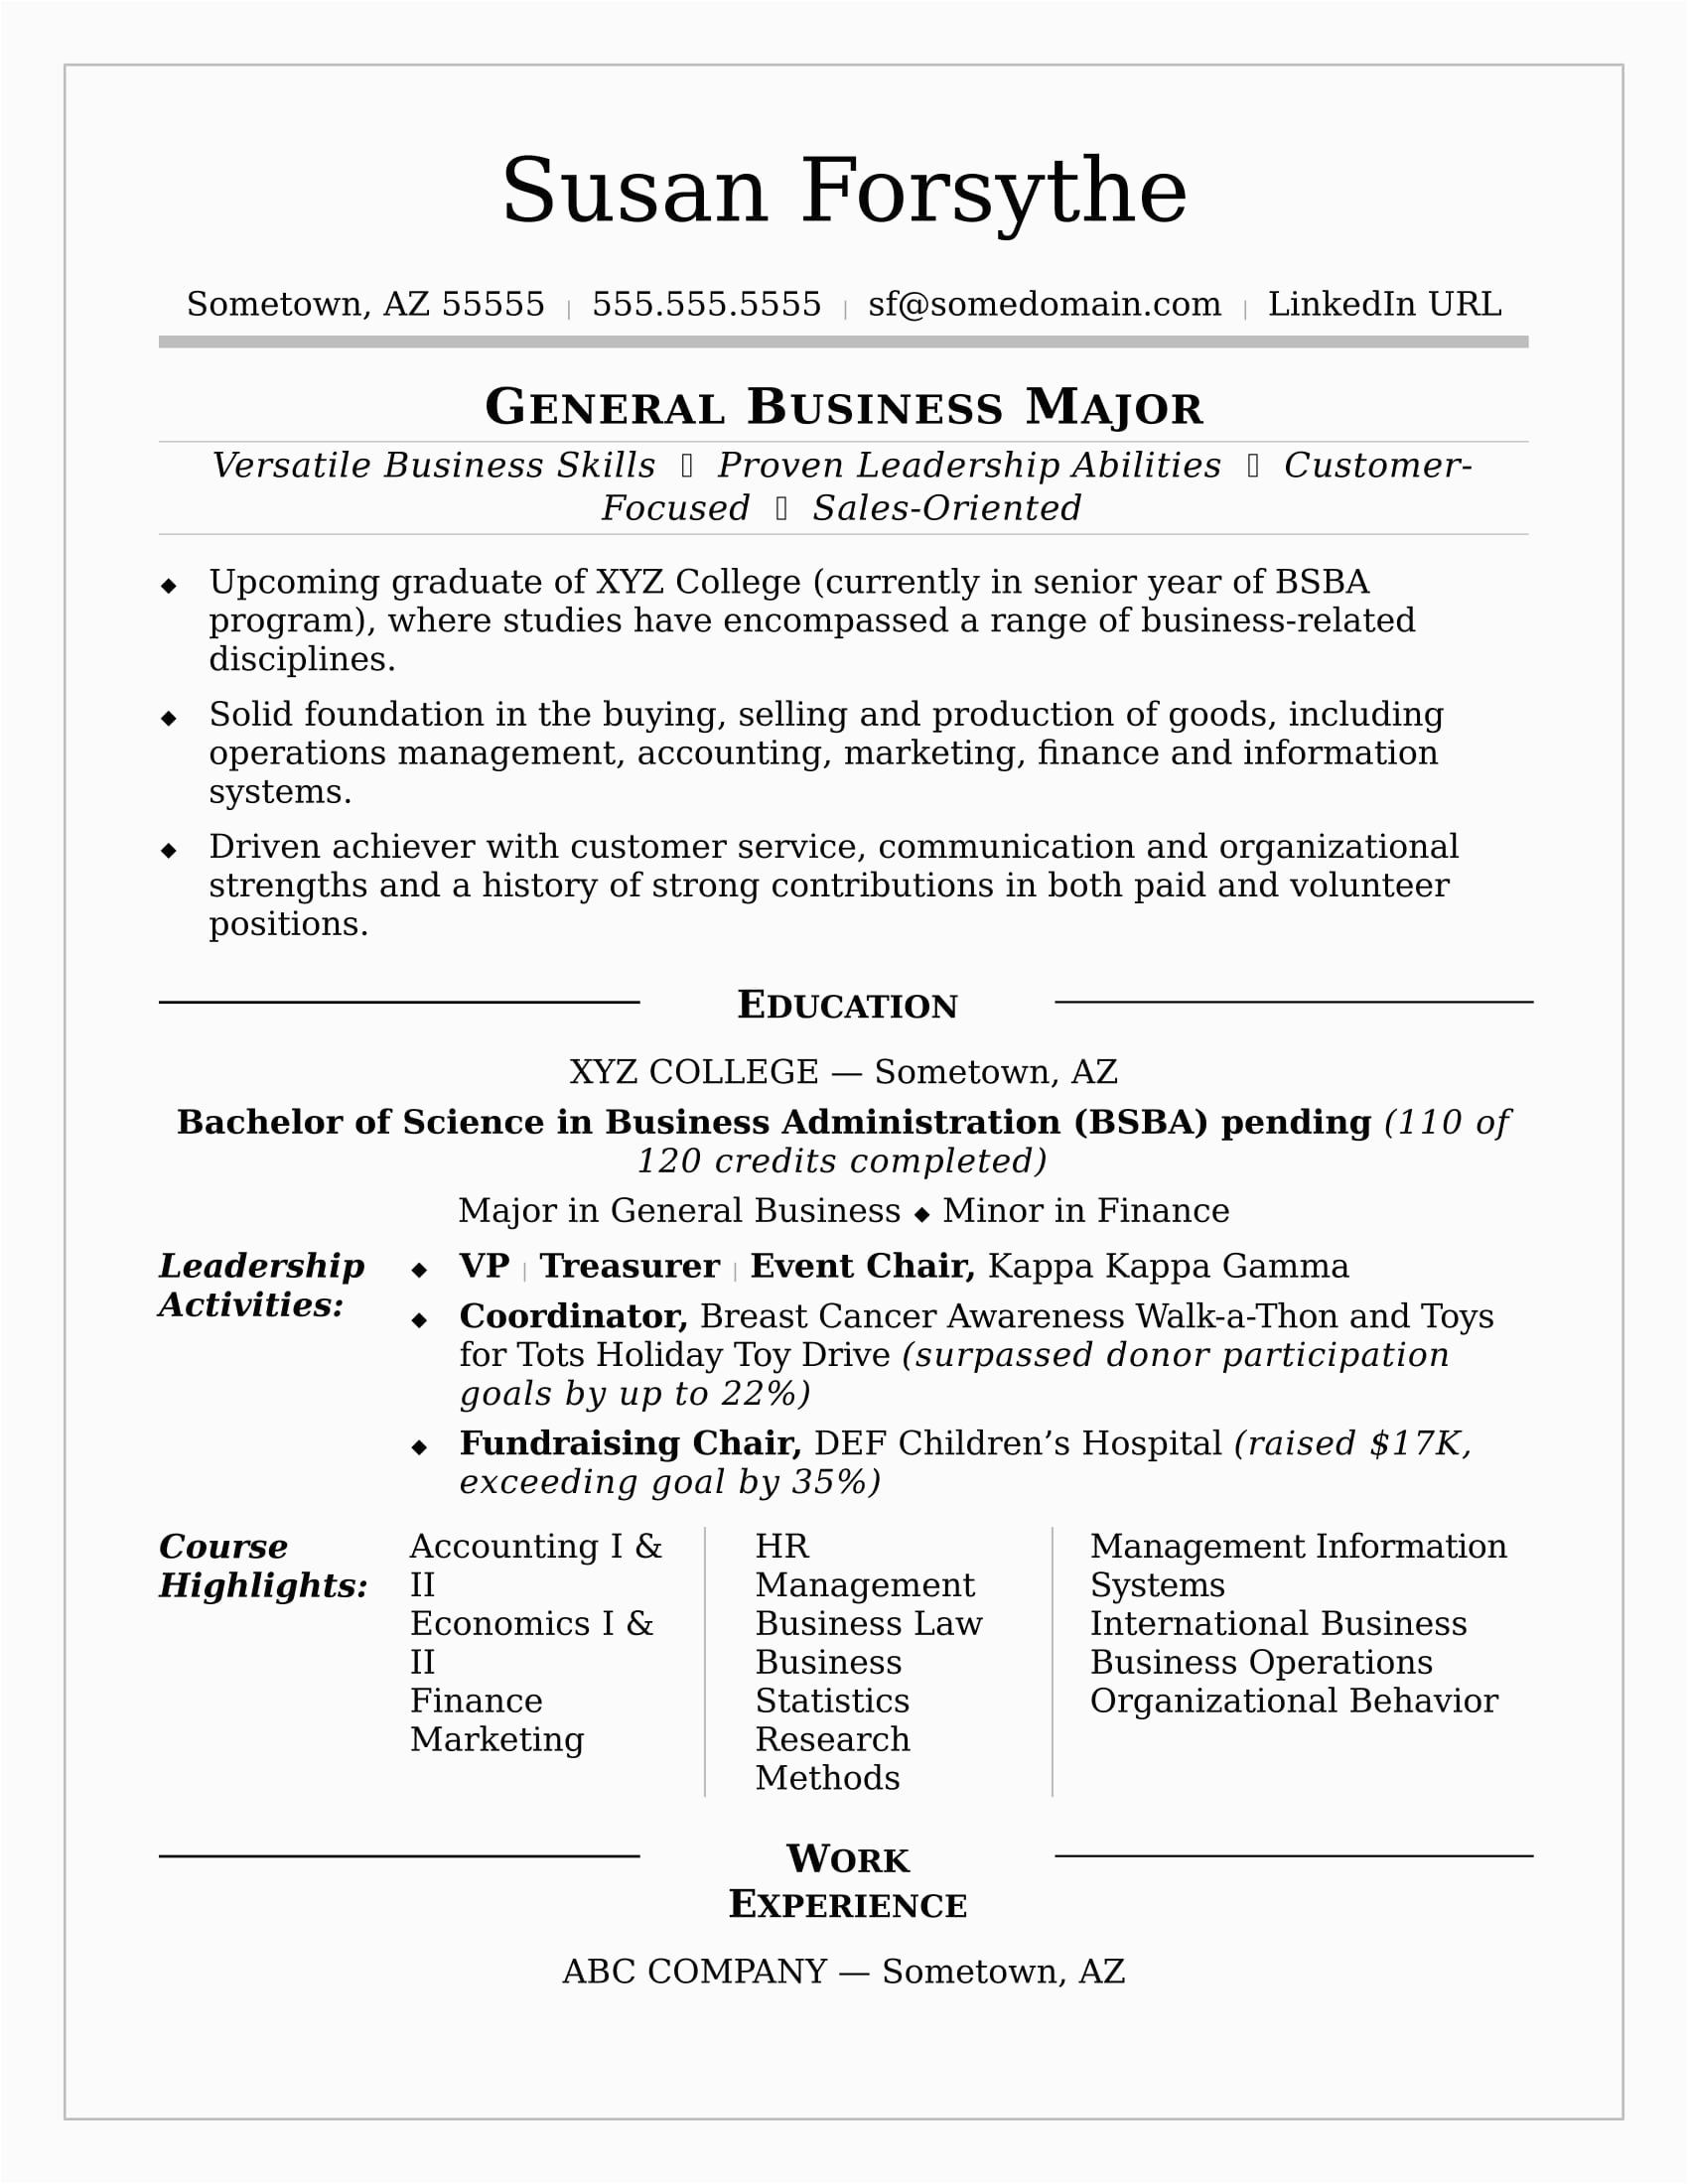 Sample Job Resume for College Student College Resume